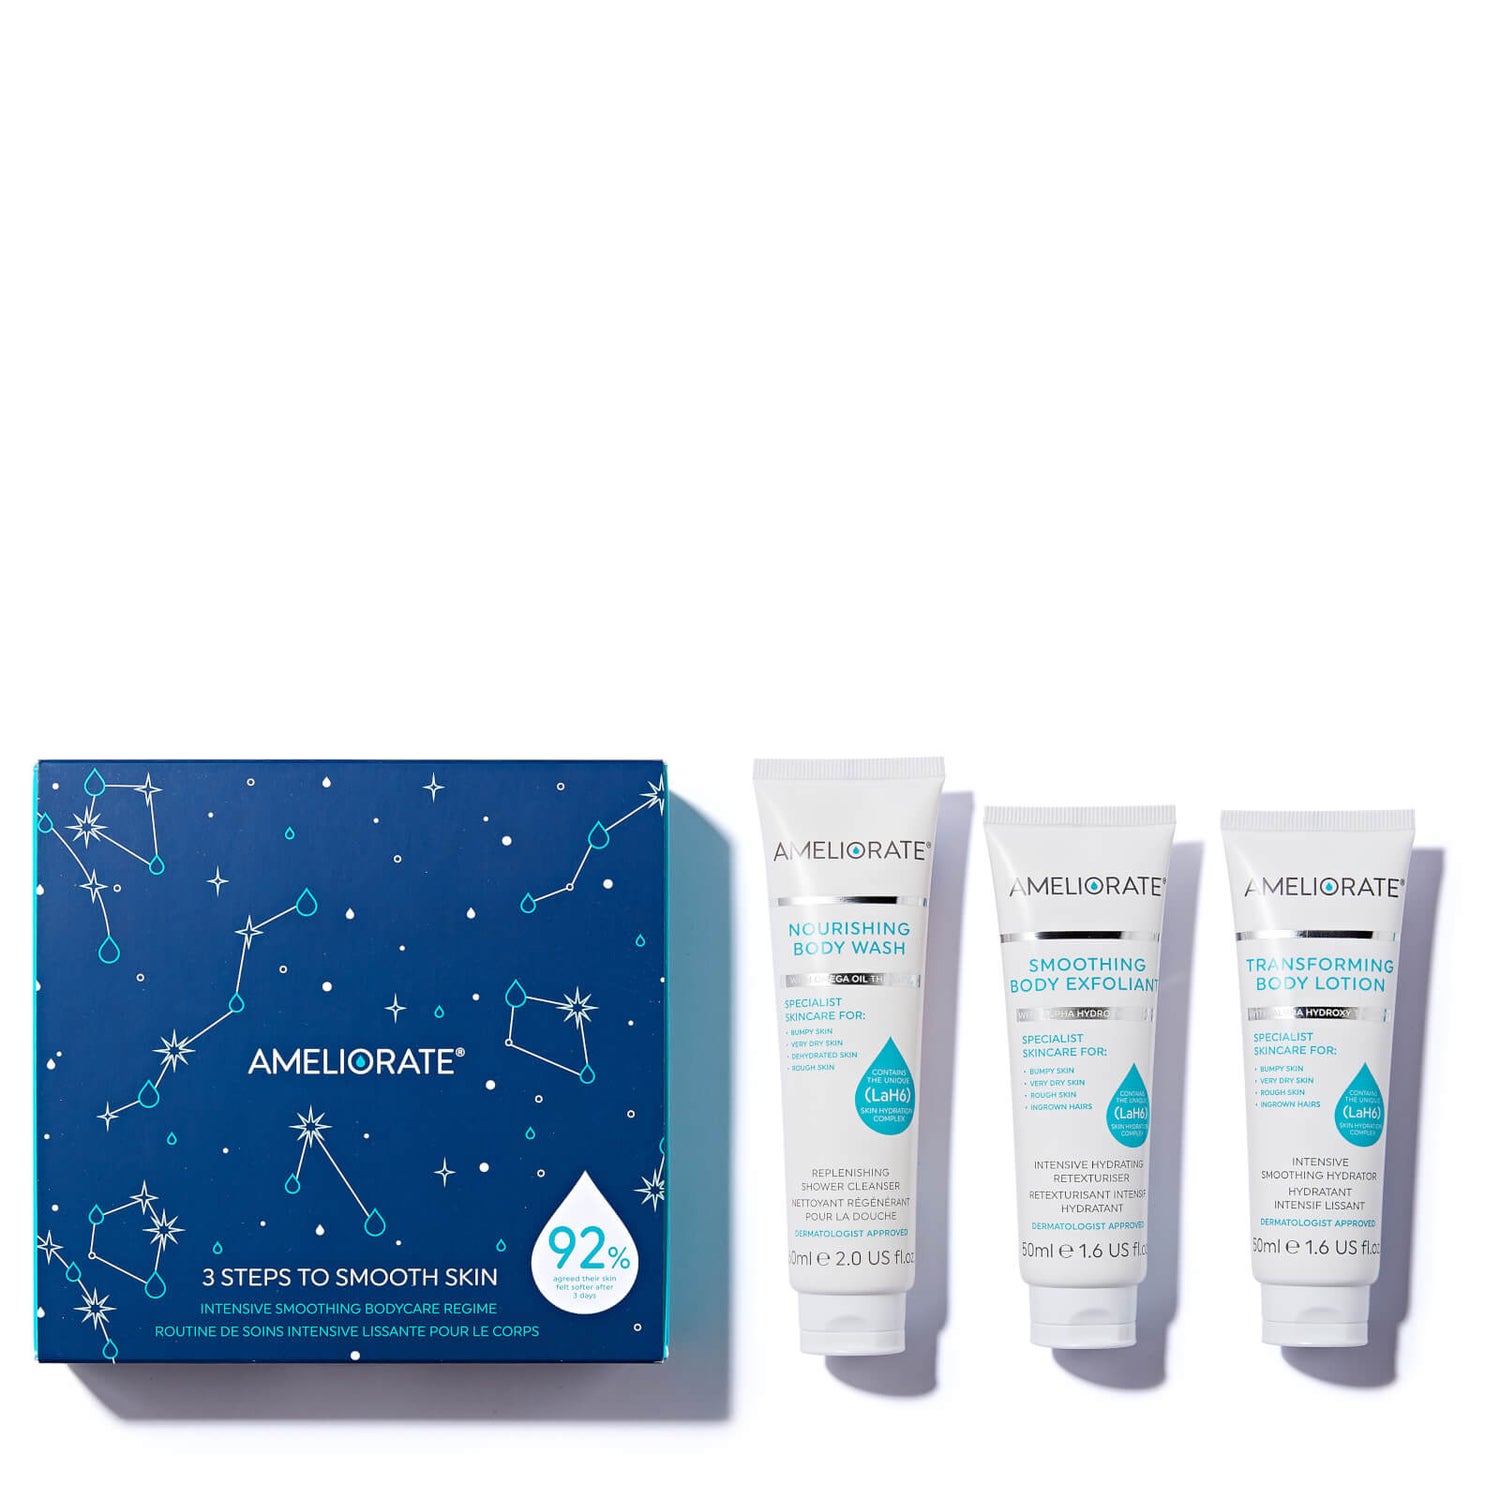 AMELIORATE 3 Steps to Smooth Skin (Christmas Edition)